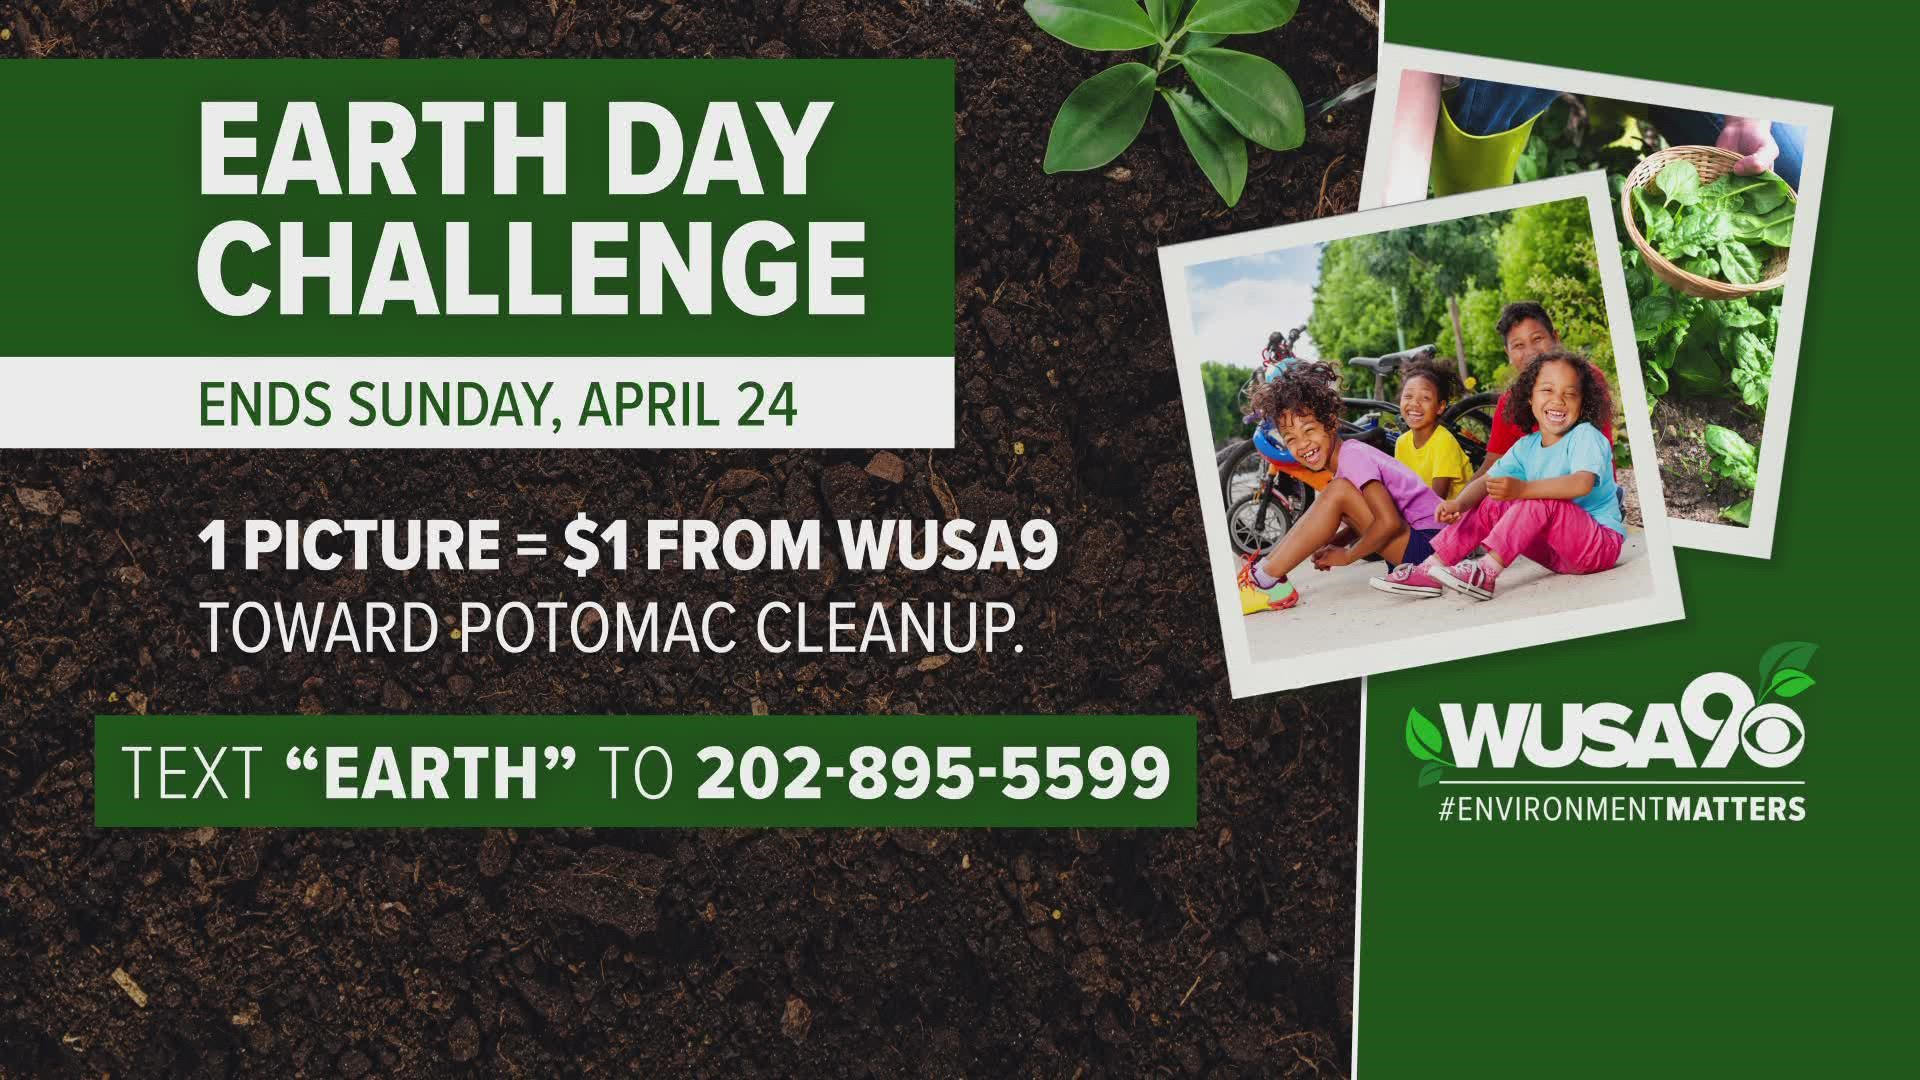 WUSA9 is donating $1 for each photo texted to us that shows you making a difference in improving the environment.